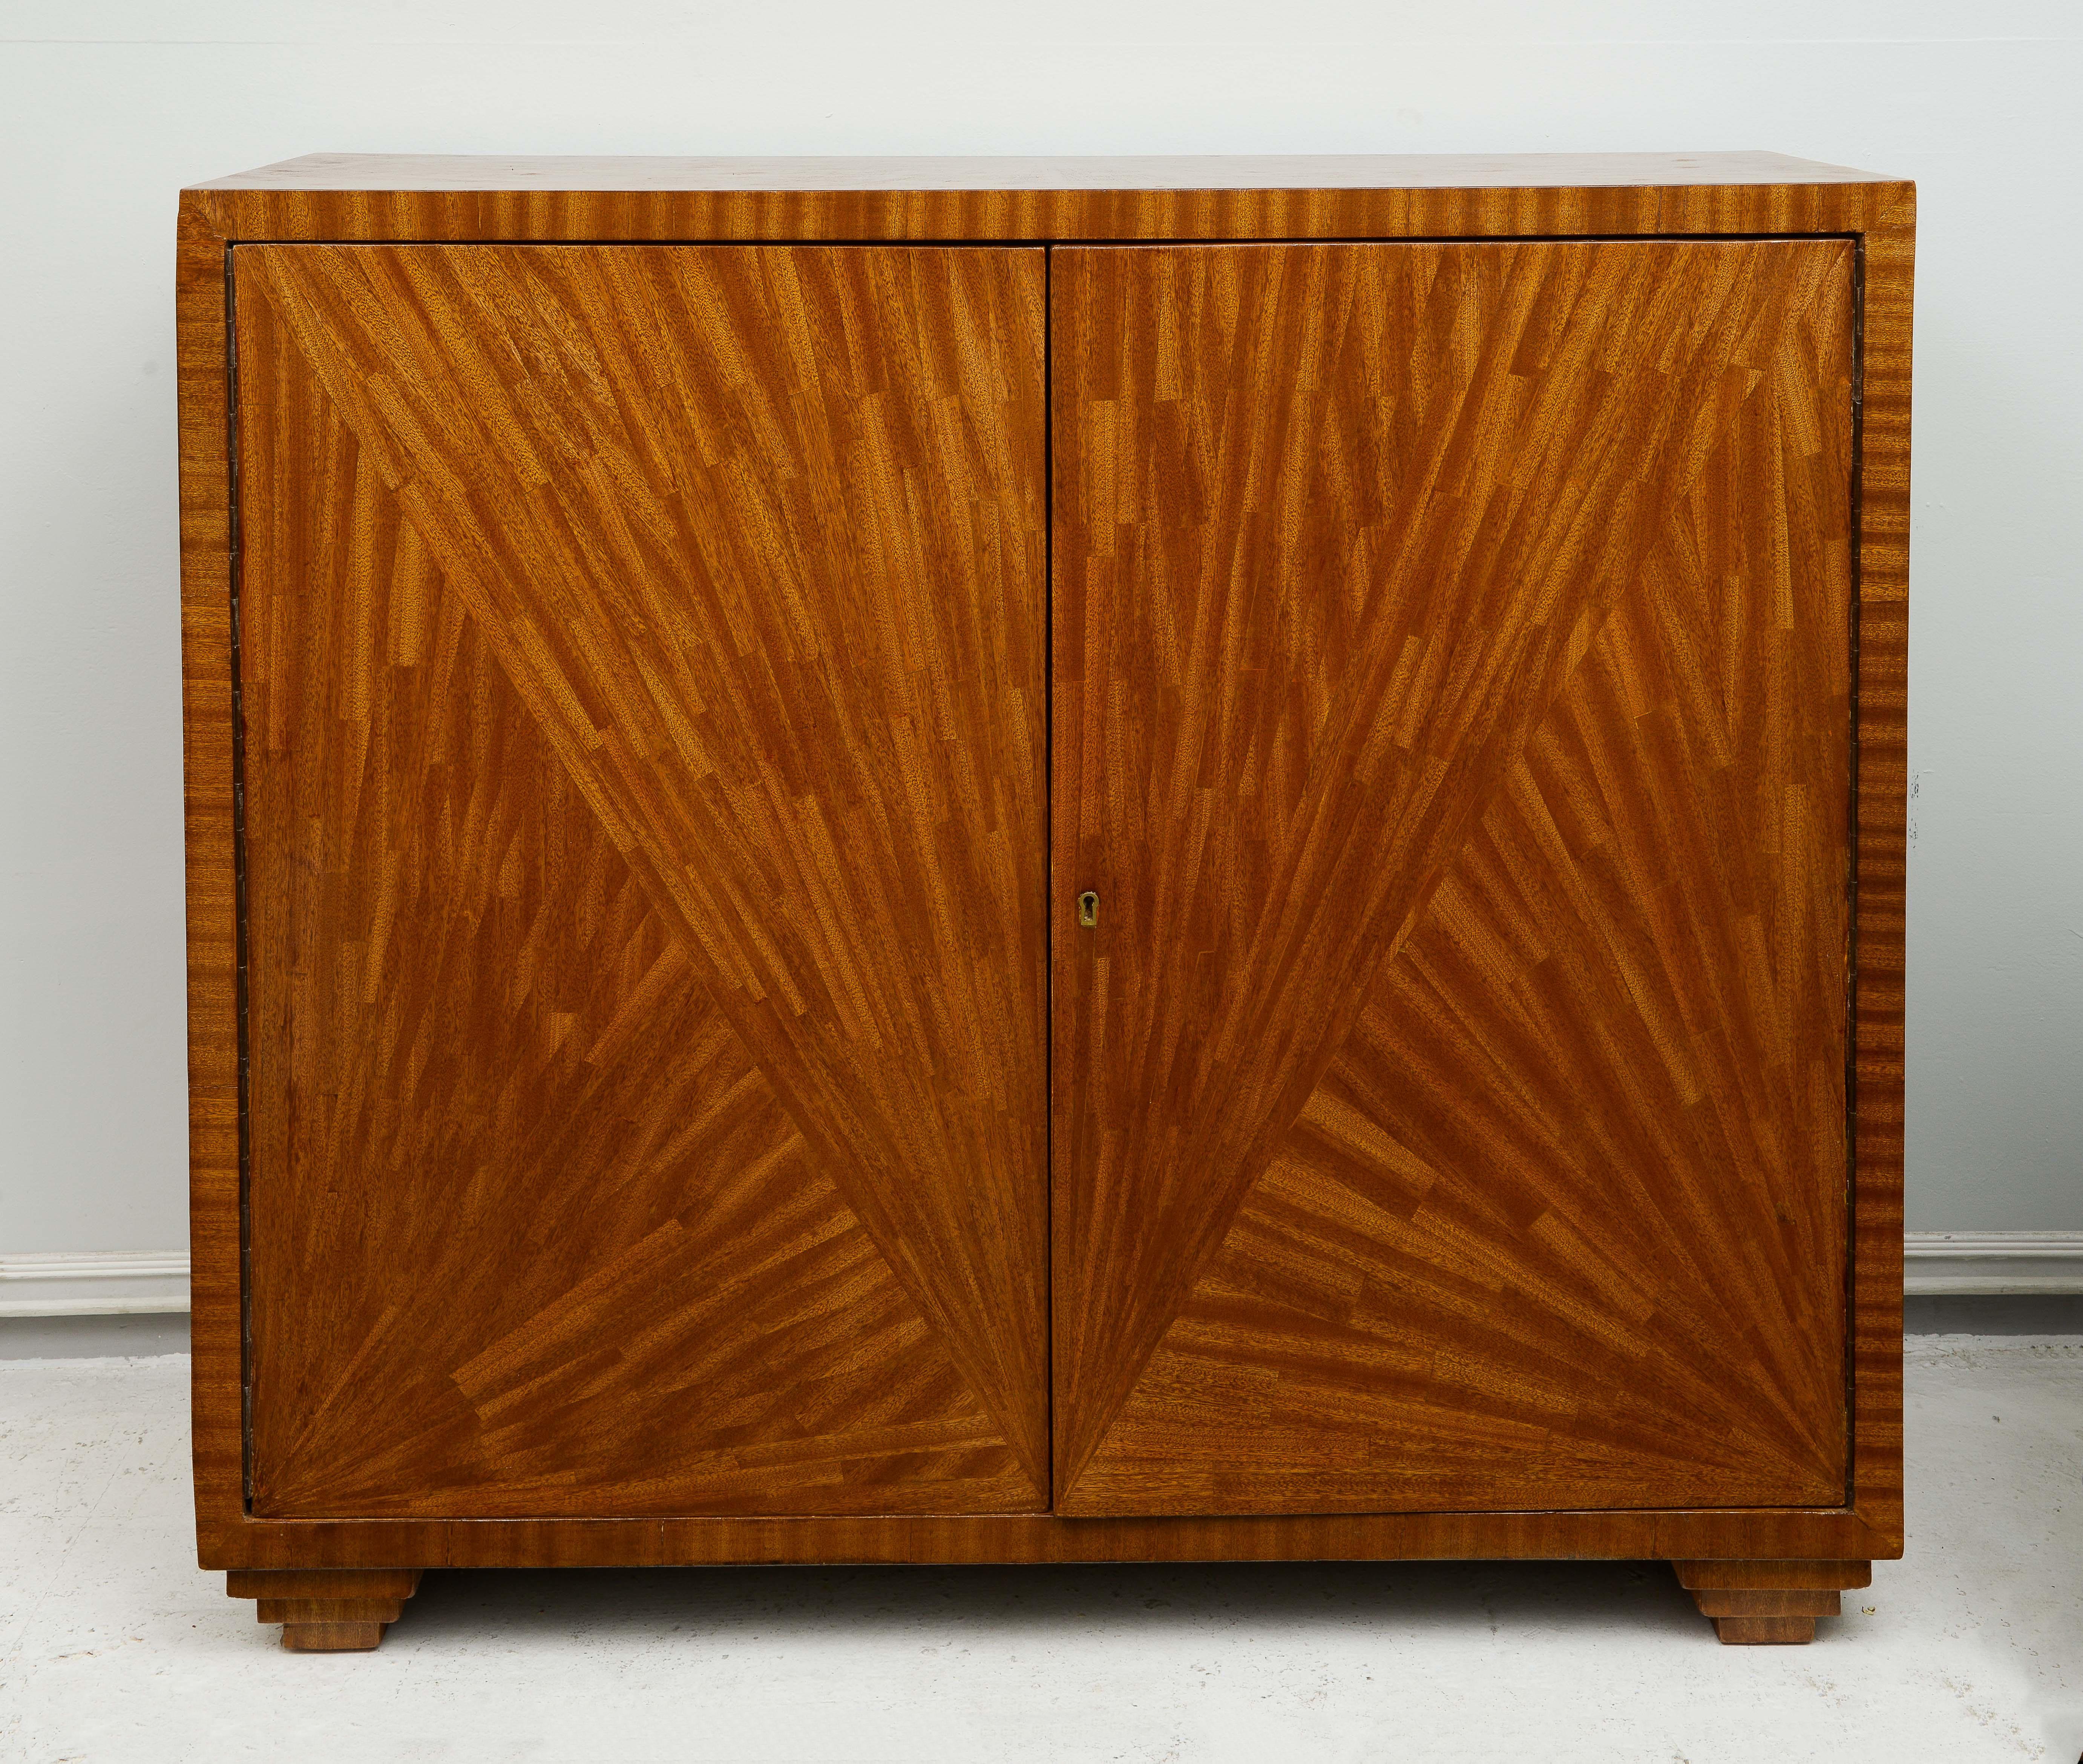 Jean-Michel Frank Inspired Exquisitely Crafted Parquetry cabinet - 20th century.